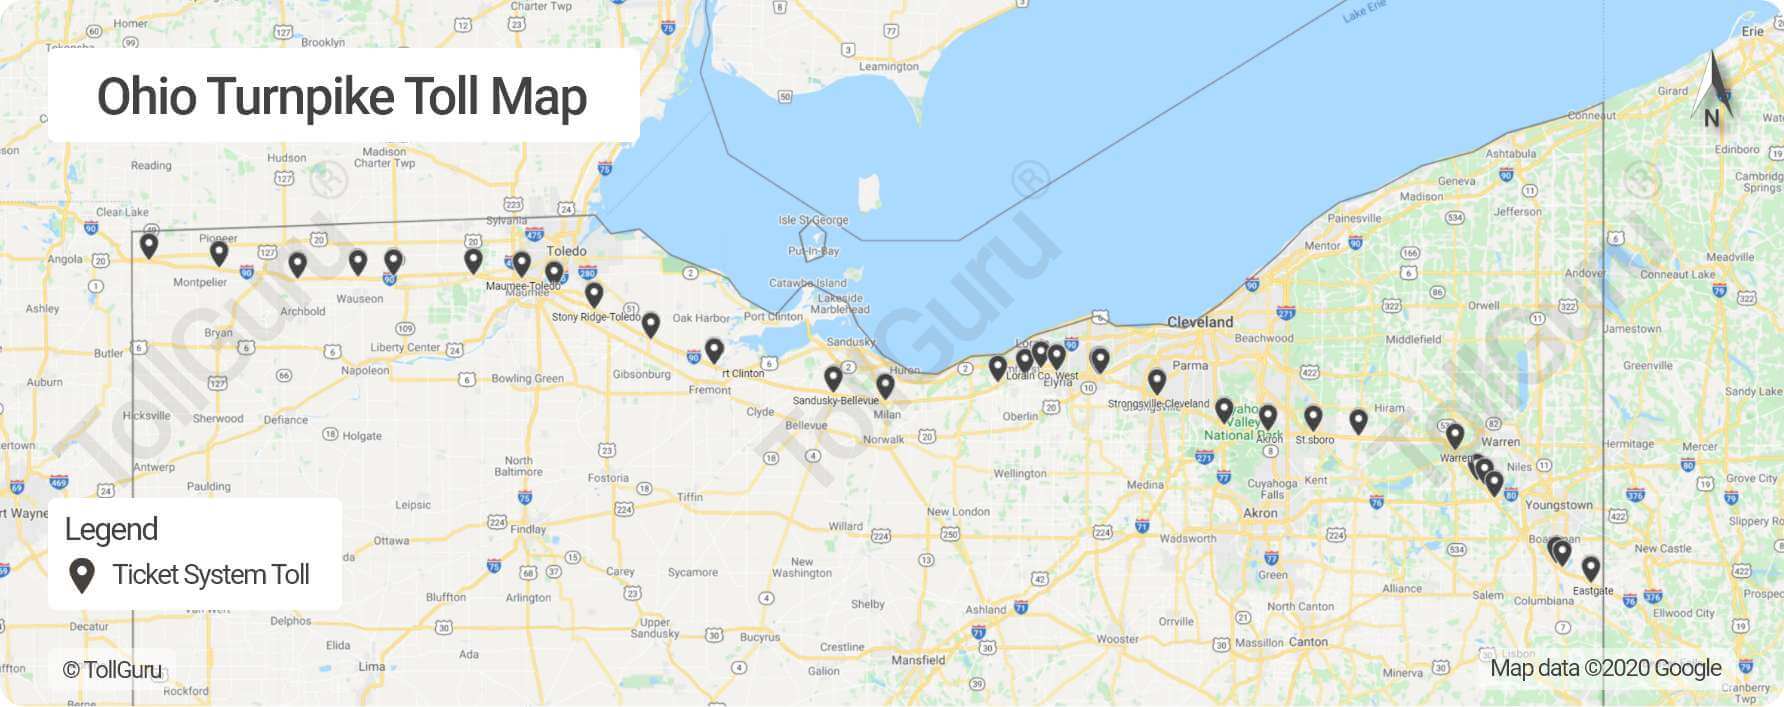 Toll booth locations on Ohio Turnpike connecting Chicago and Pittsburg which is part of I 80, I 76 and I 90